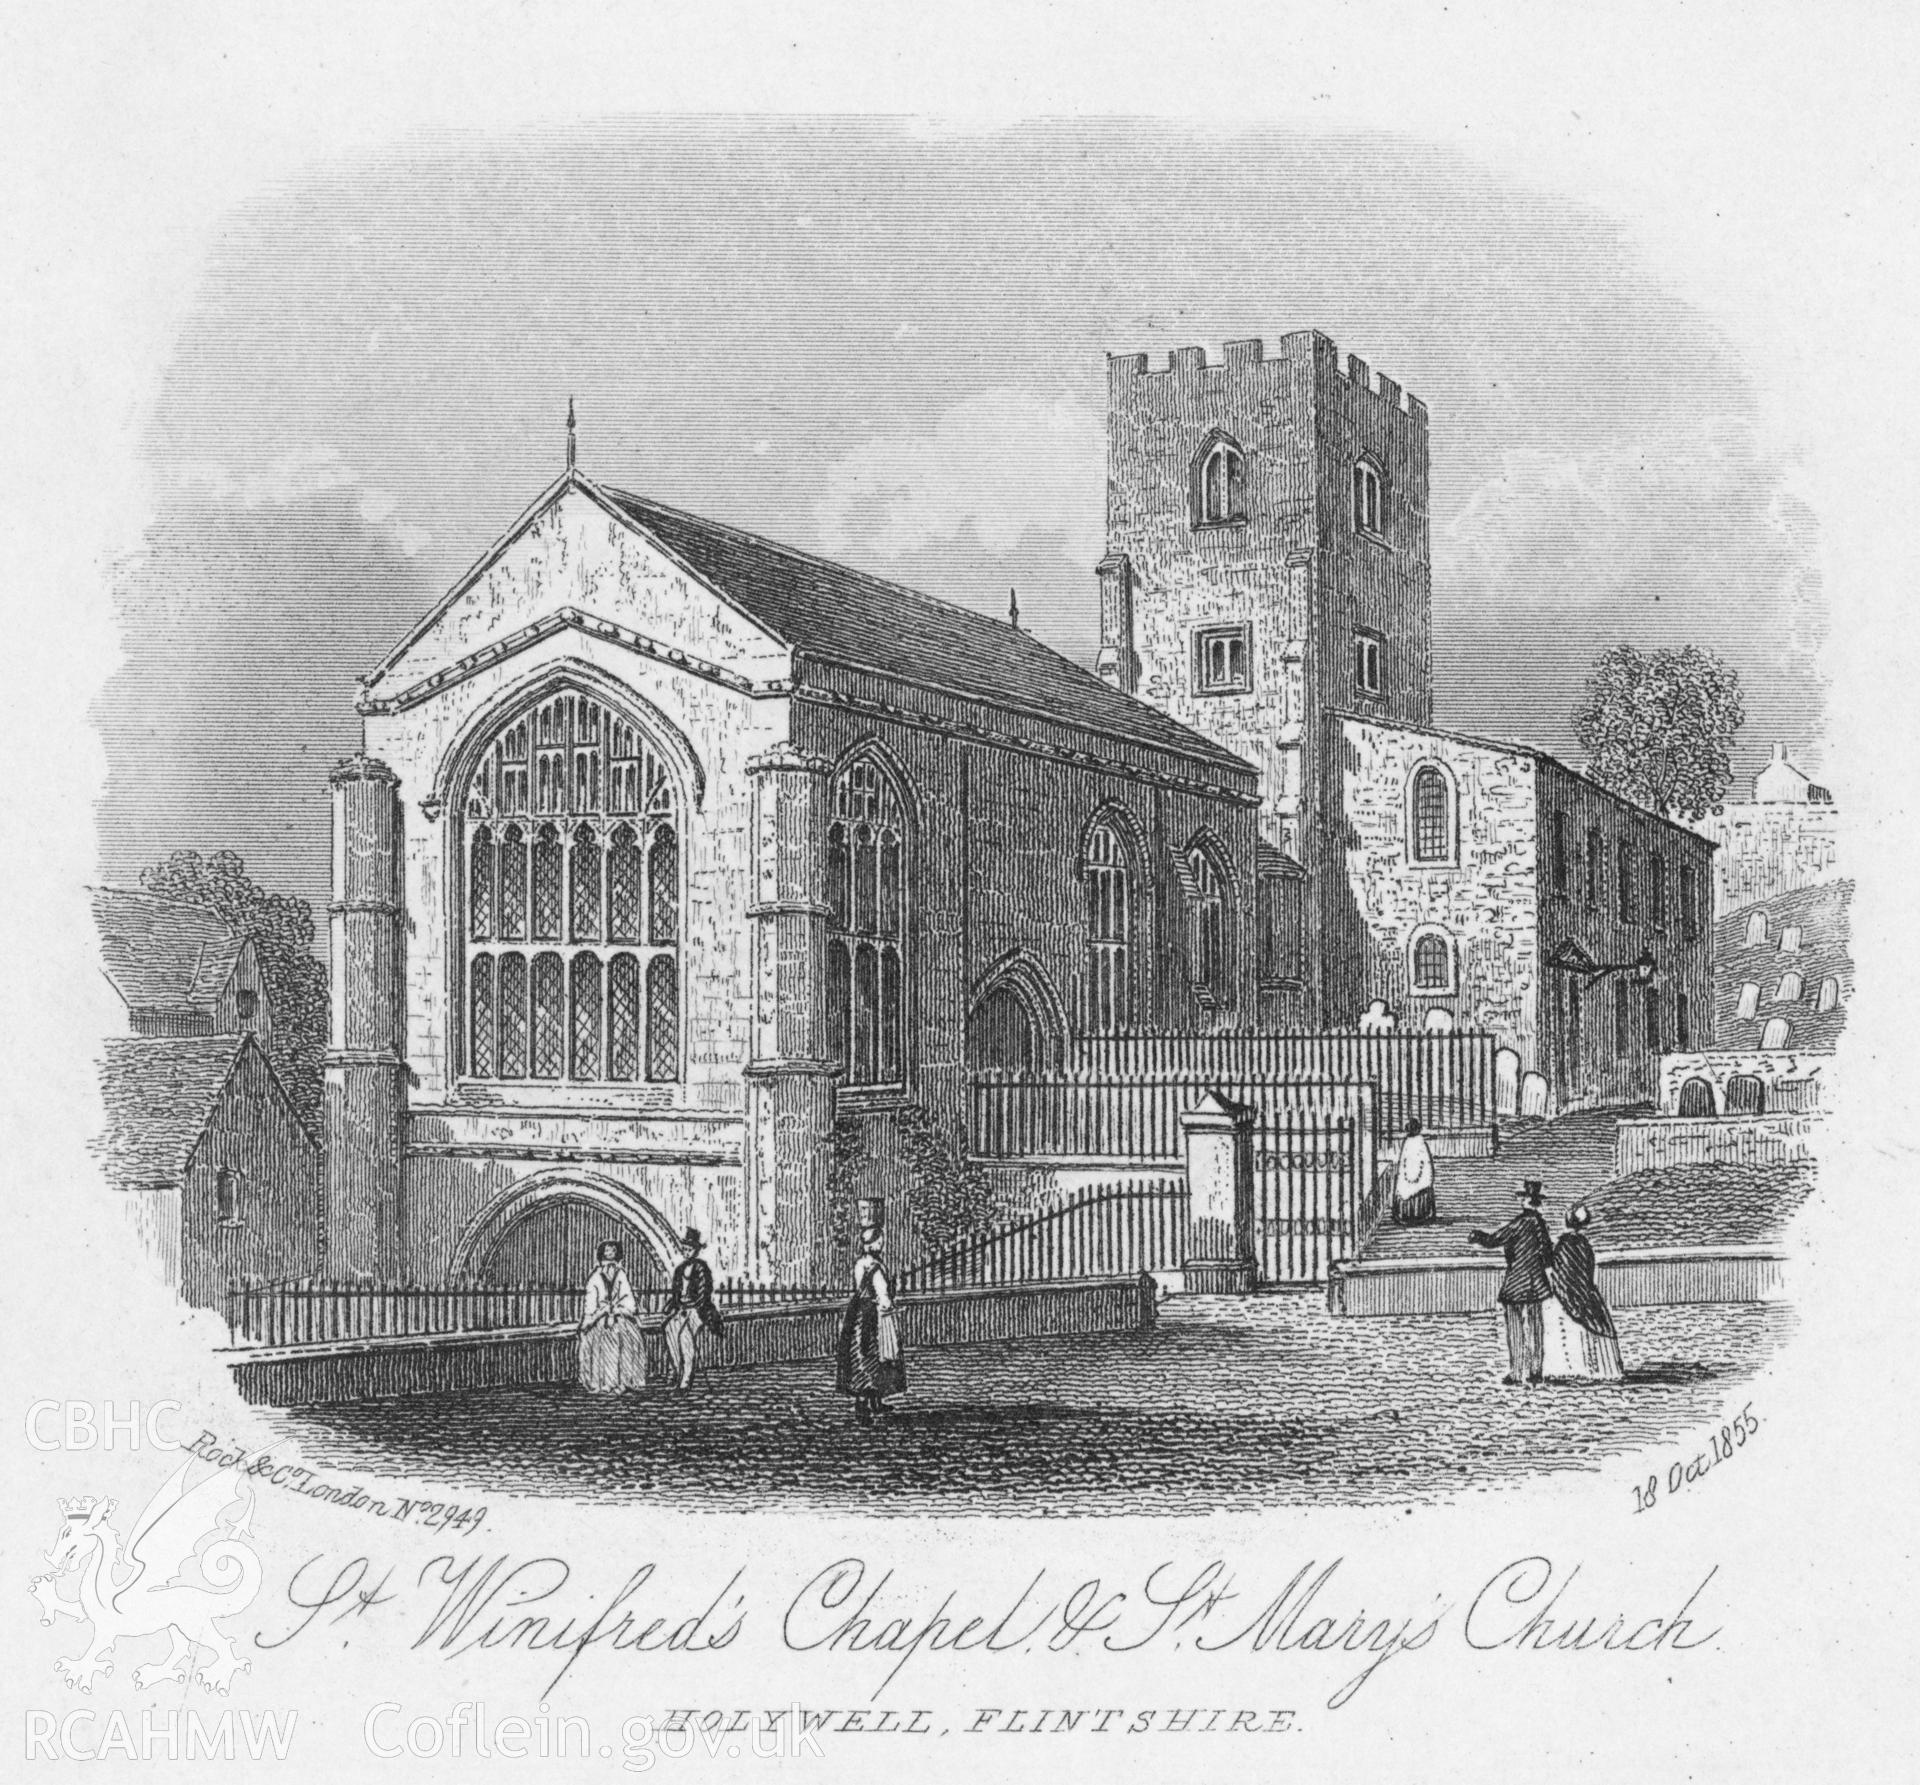 Digital copy of an etching showing St Winifrede's Well and St Mary's Church.